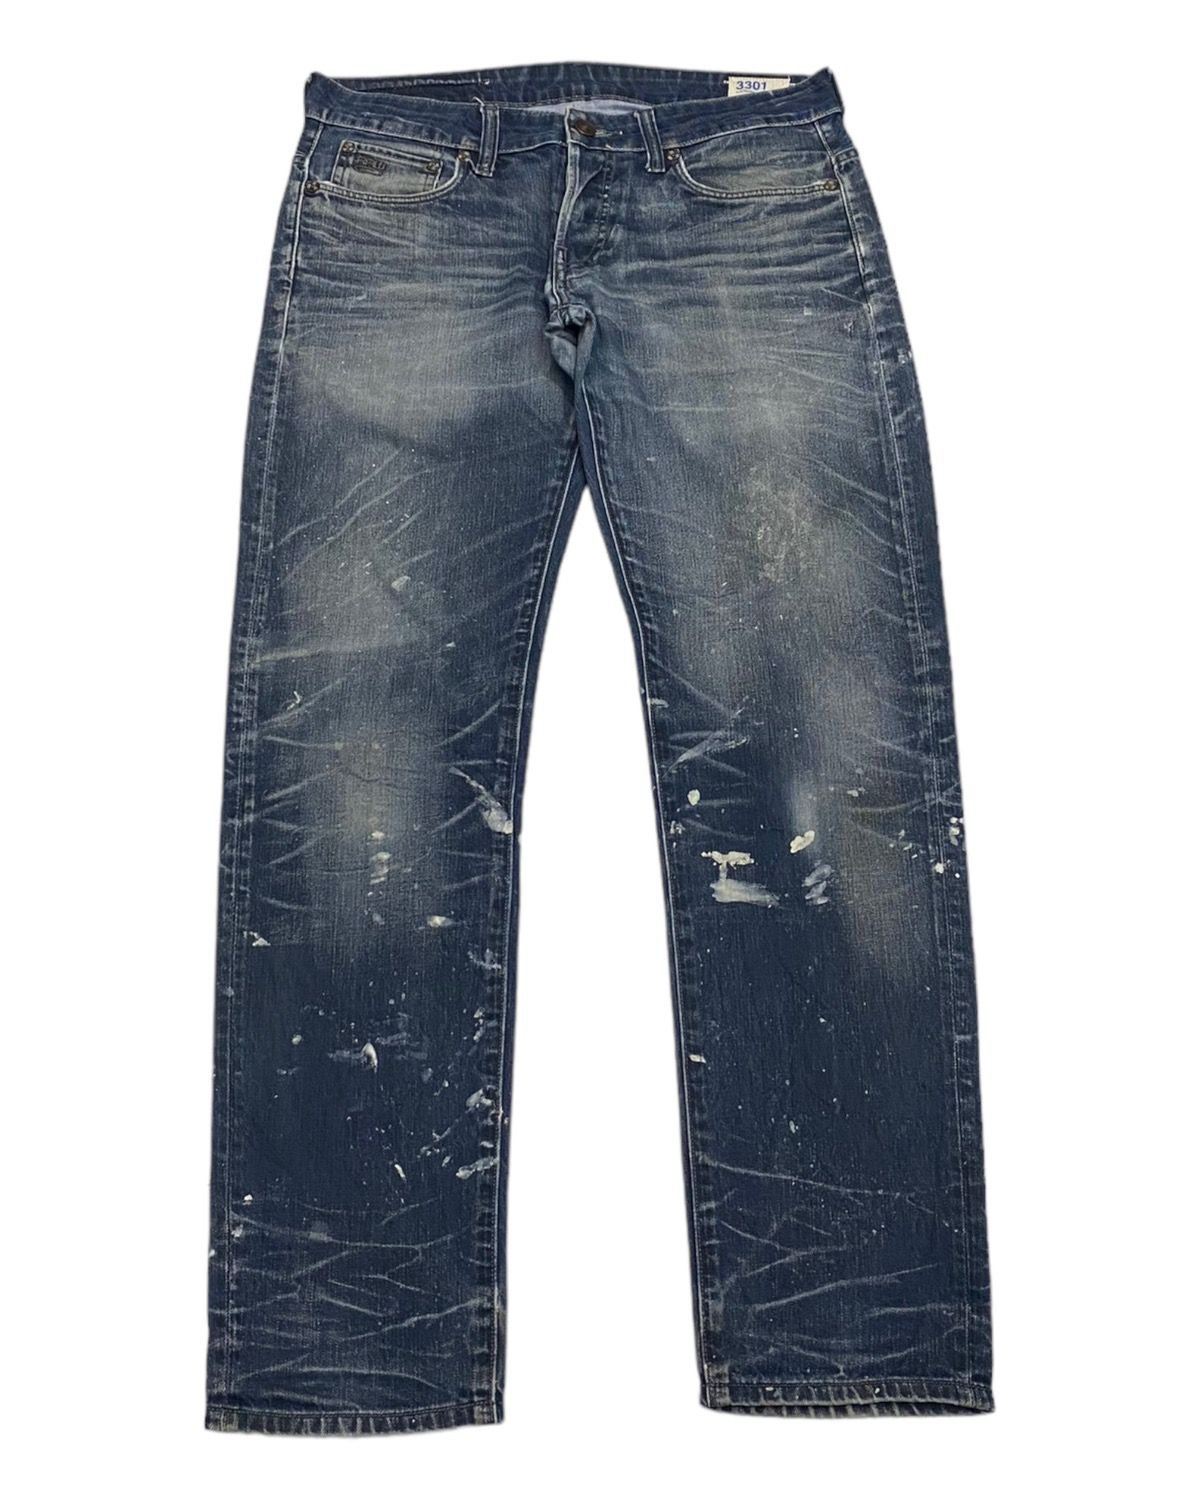 Archival Clothing - G-STAR RAW DISTRESSED PAINTED 3301 UNDERCOVER STYLE JEANS - 1